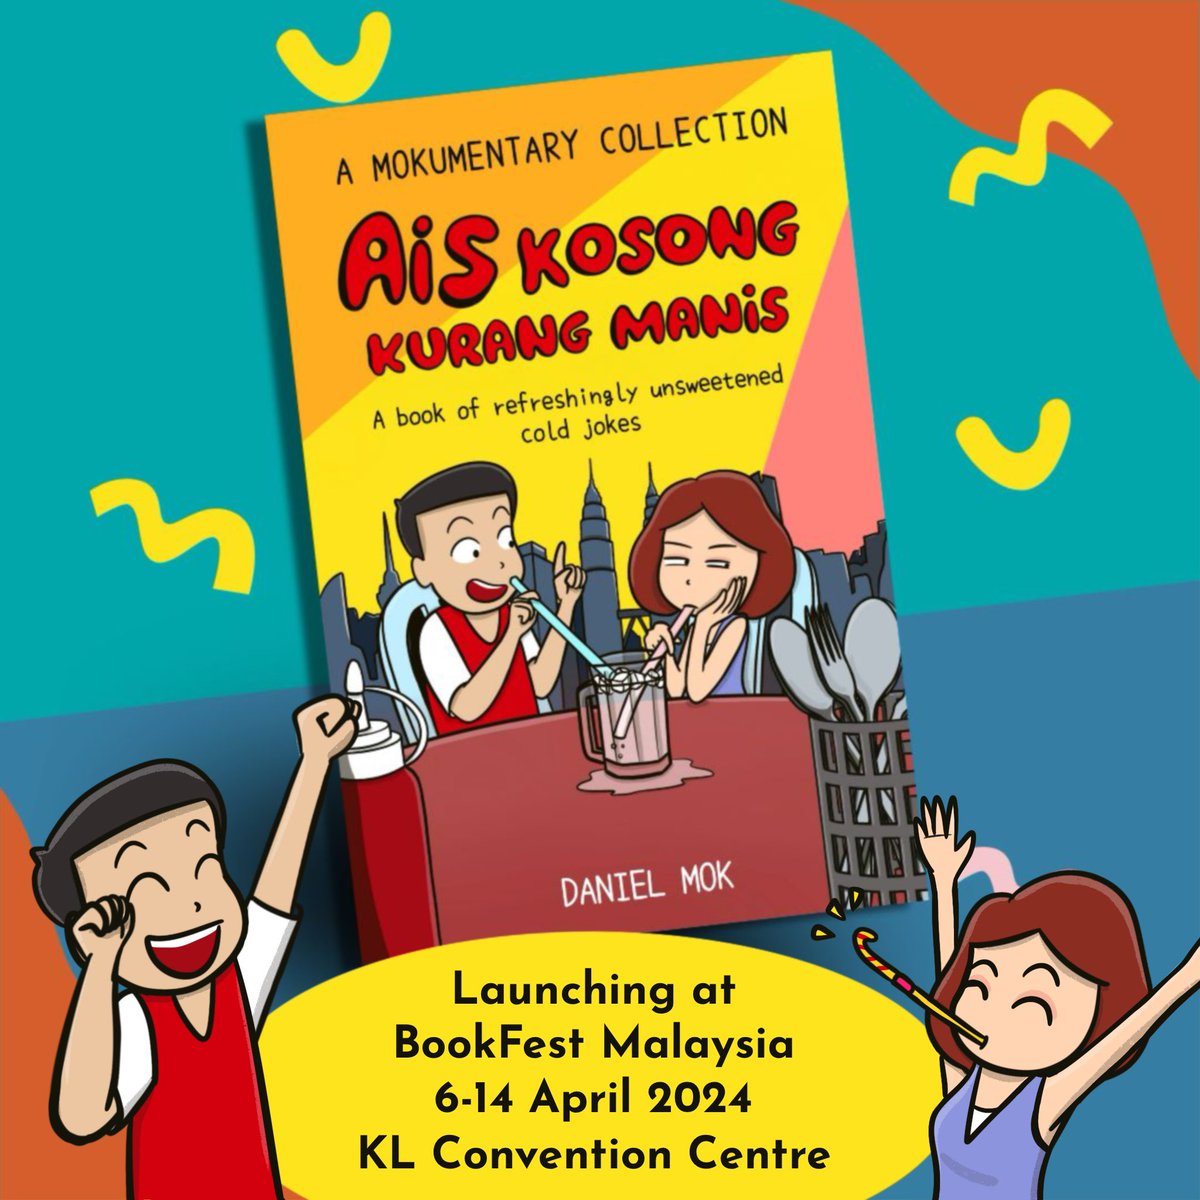 🎉BOOK LAUNCH ALERT!🎉 After months of keeping it under wraps I’m finally releasing my first book Ais Kosong Kurang Manis! 🧊 This is a collection of my favourite comics, plus many ‘remastered’ ones or previously never released online. 🤩 1/2